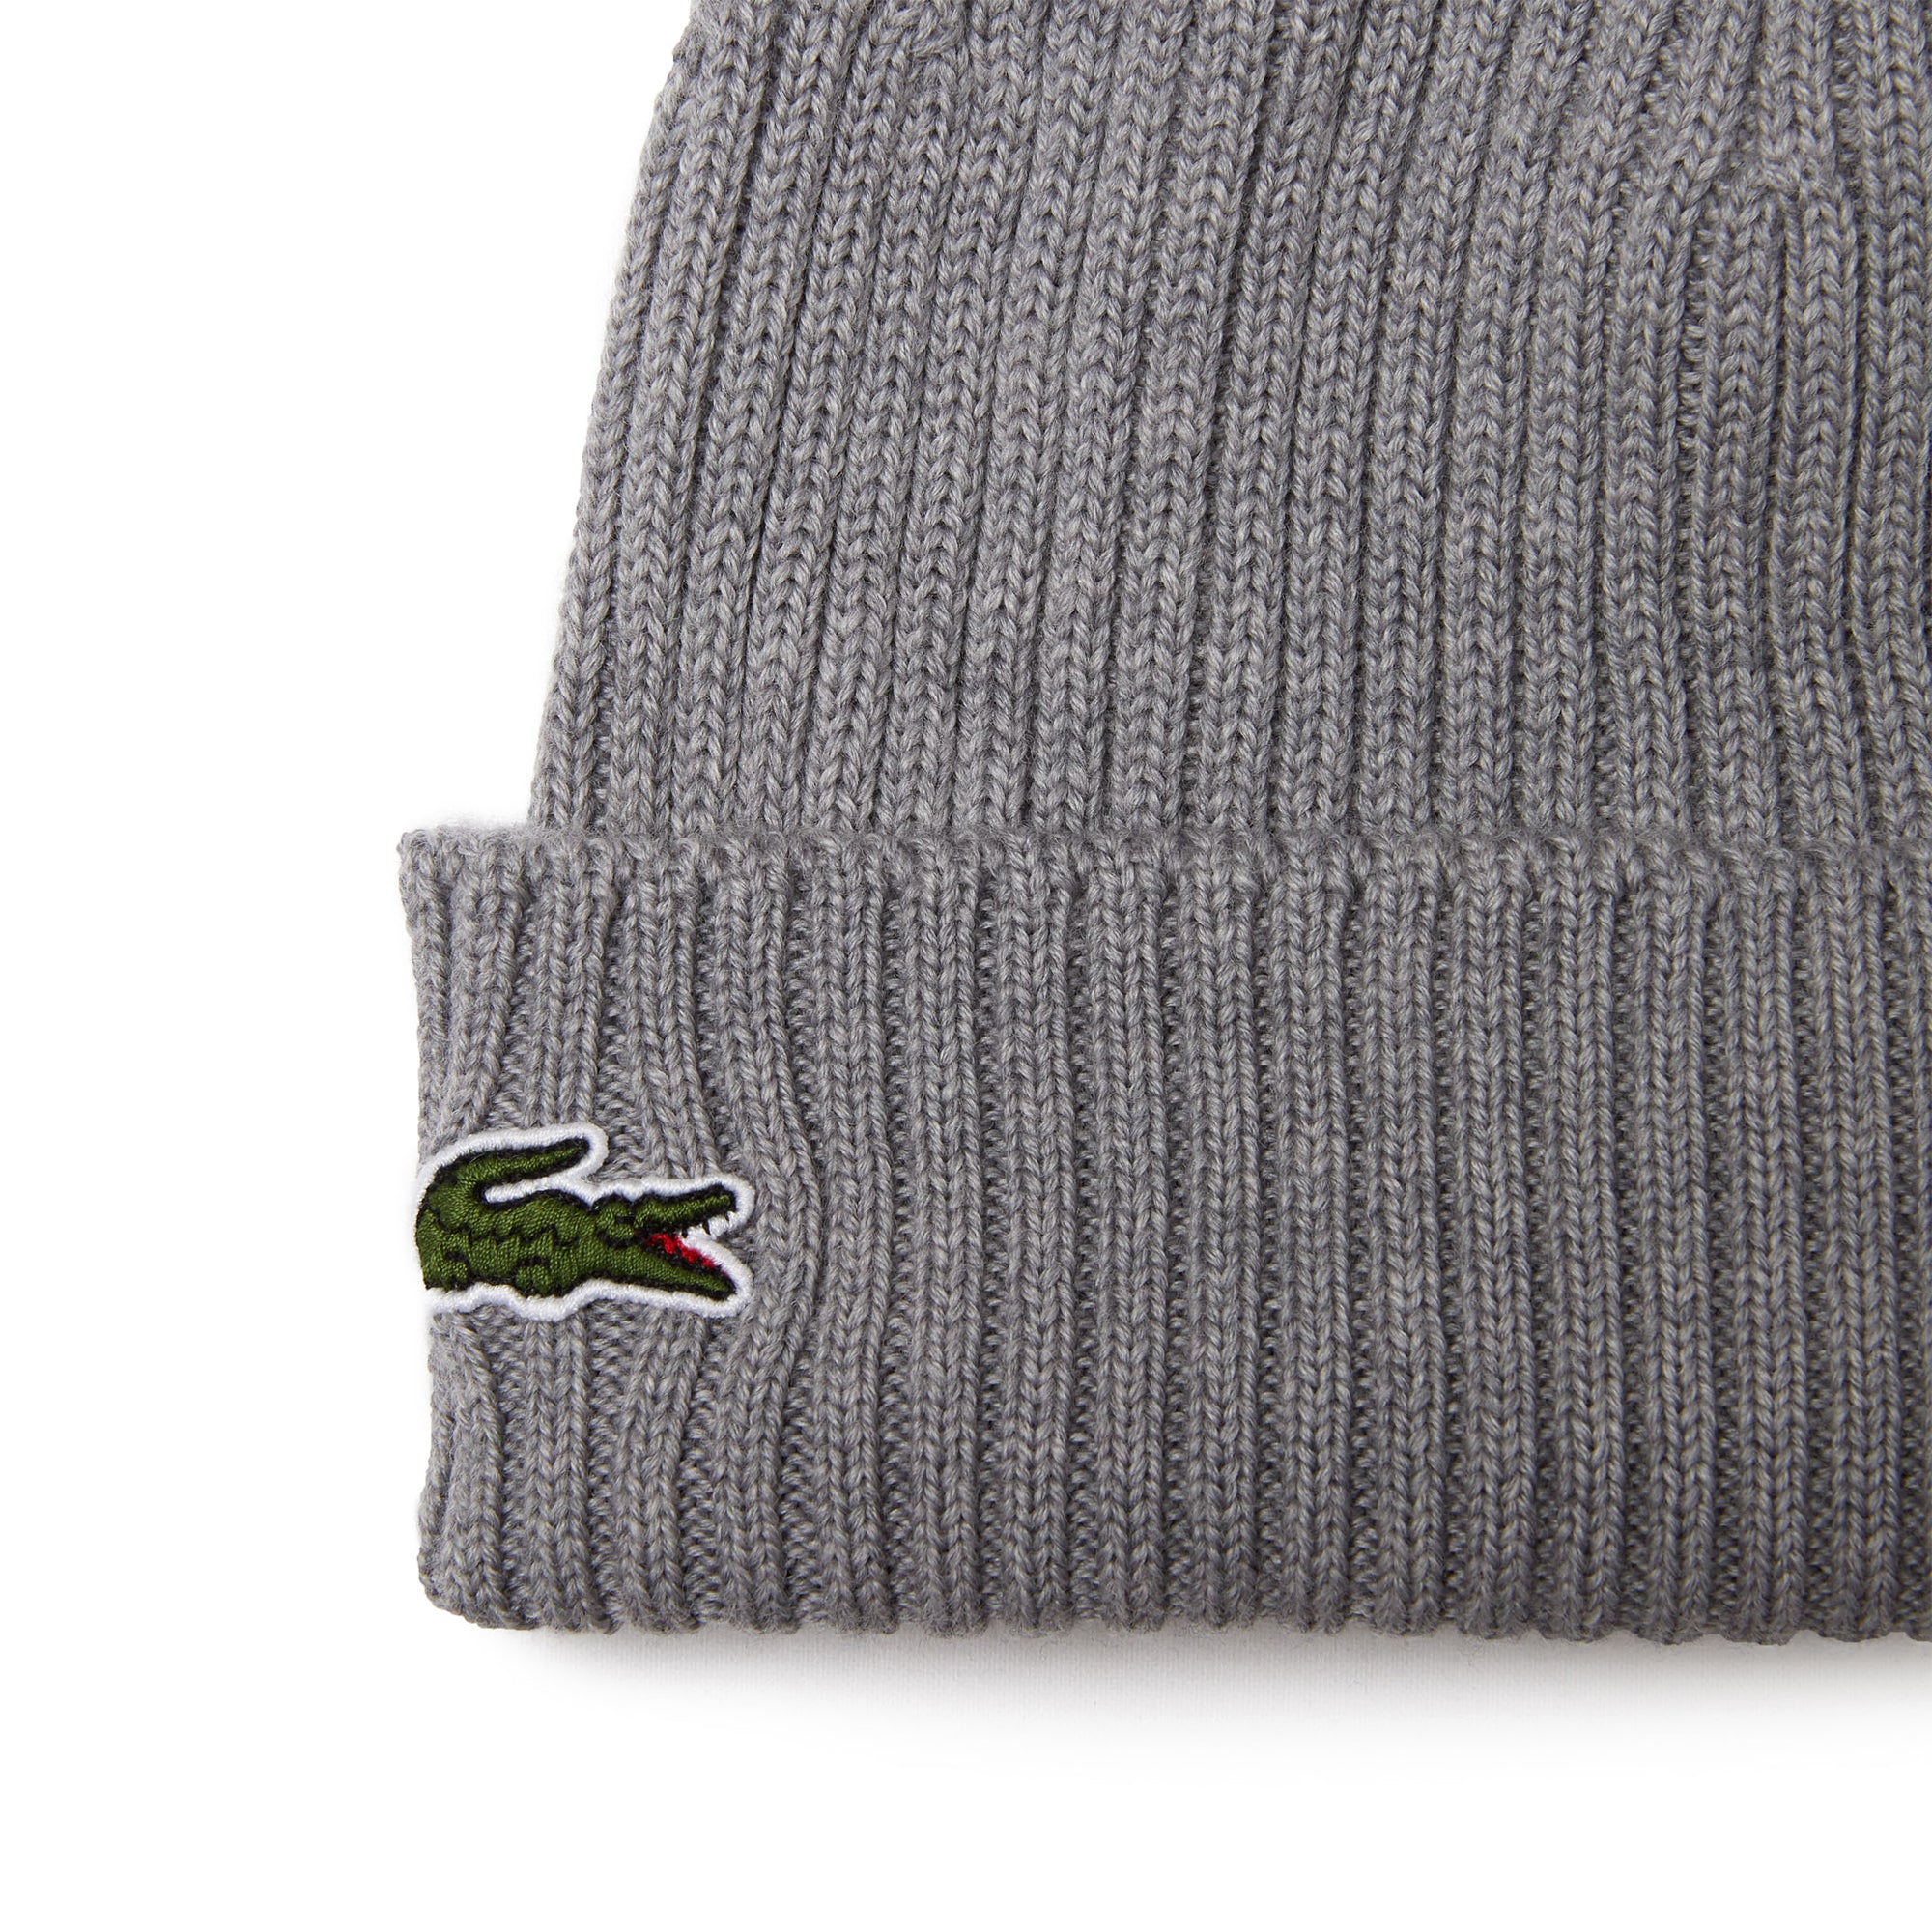 Palads jogger landing Lacoste Ribbed Wool Beanie Hat RB0001 Grey Chine YRD | Function18